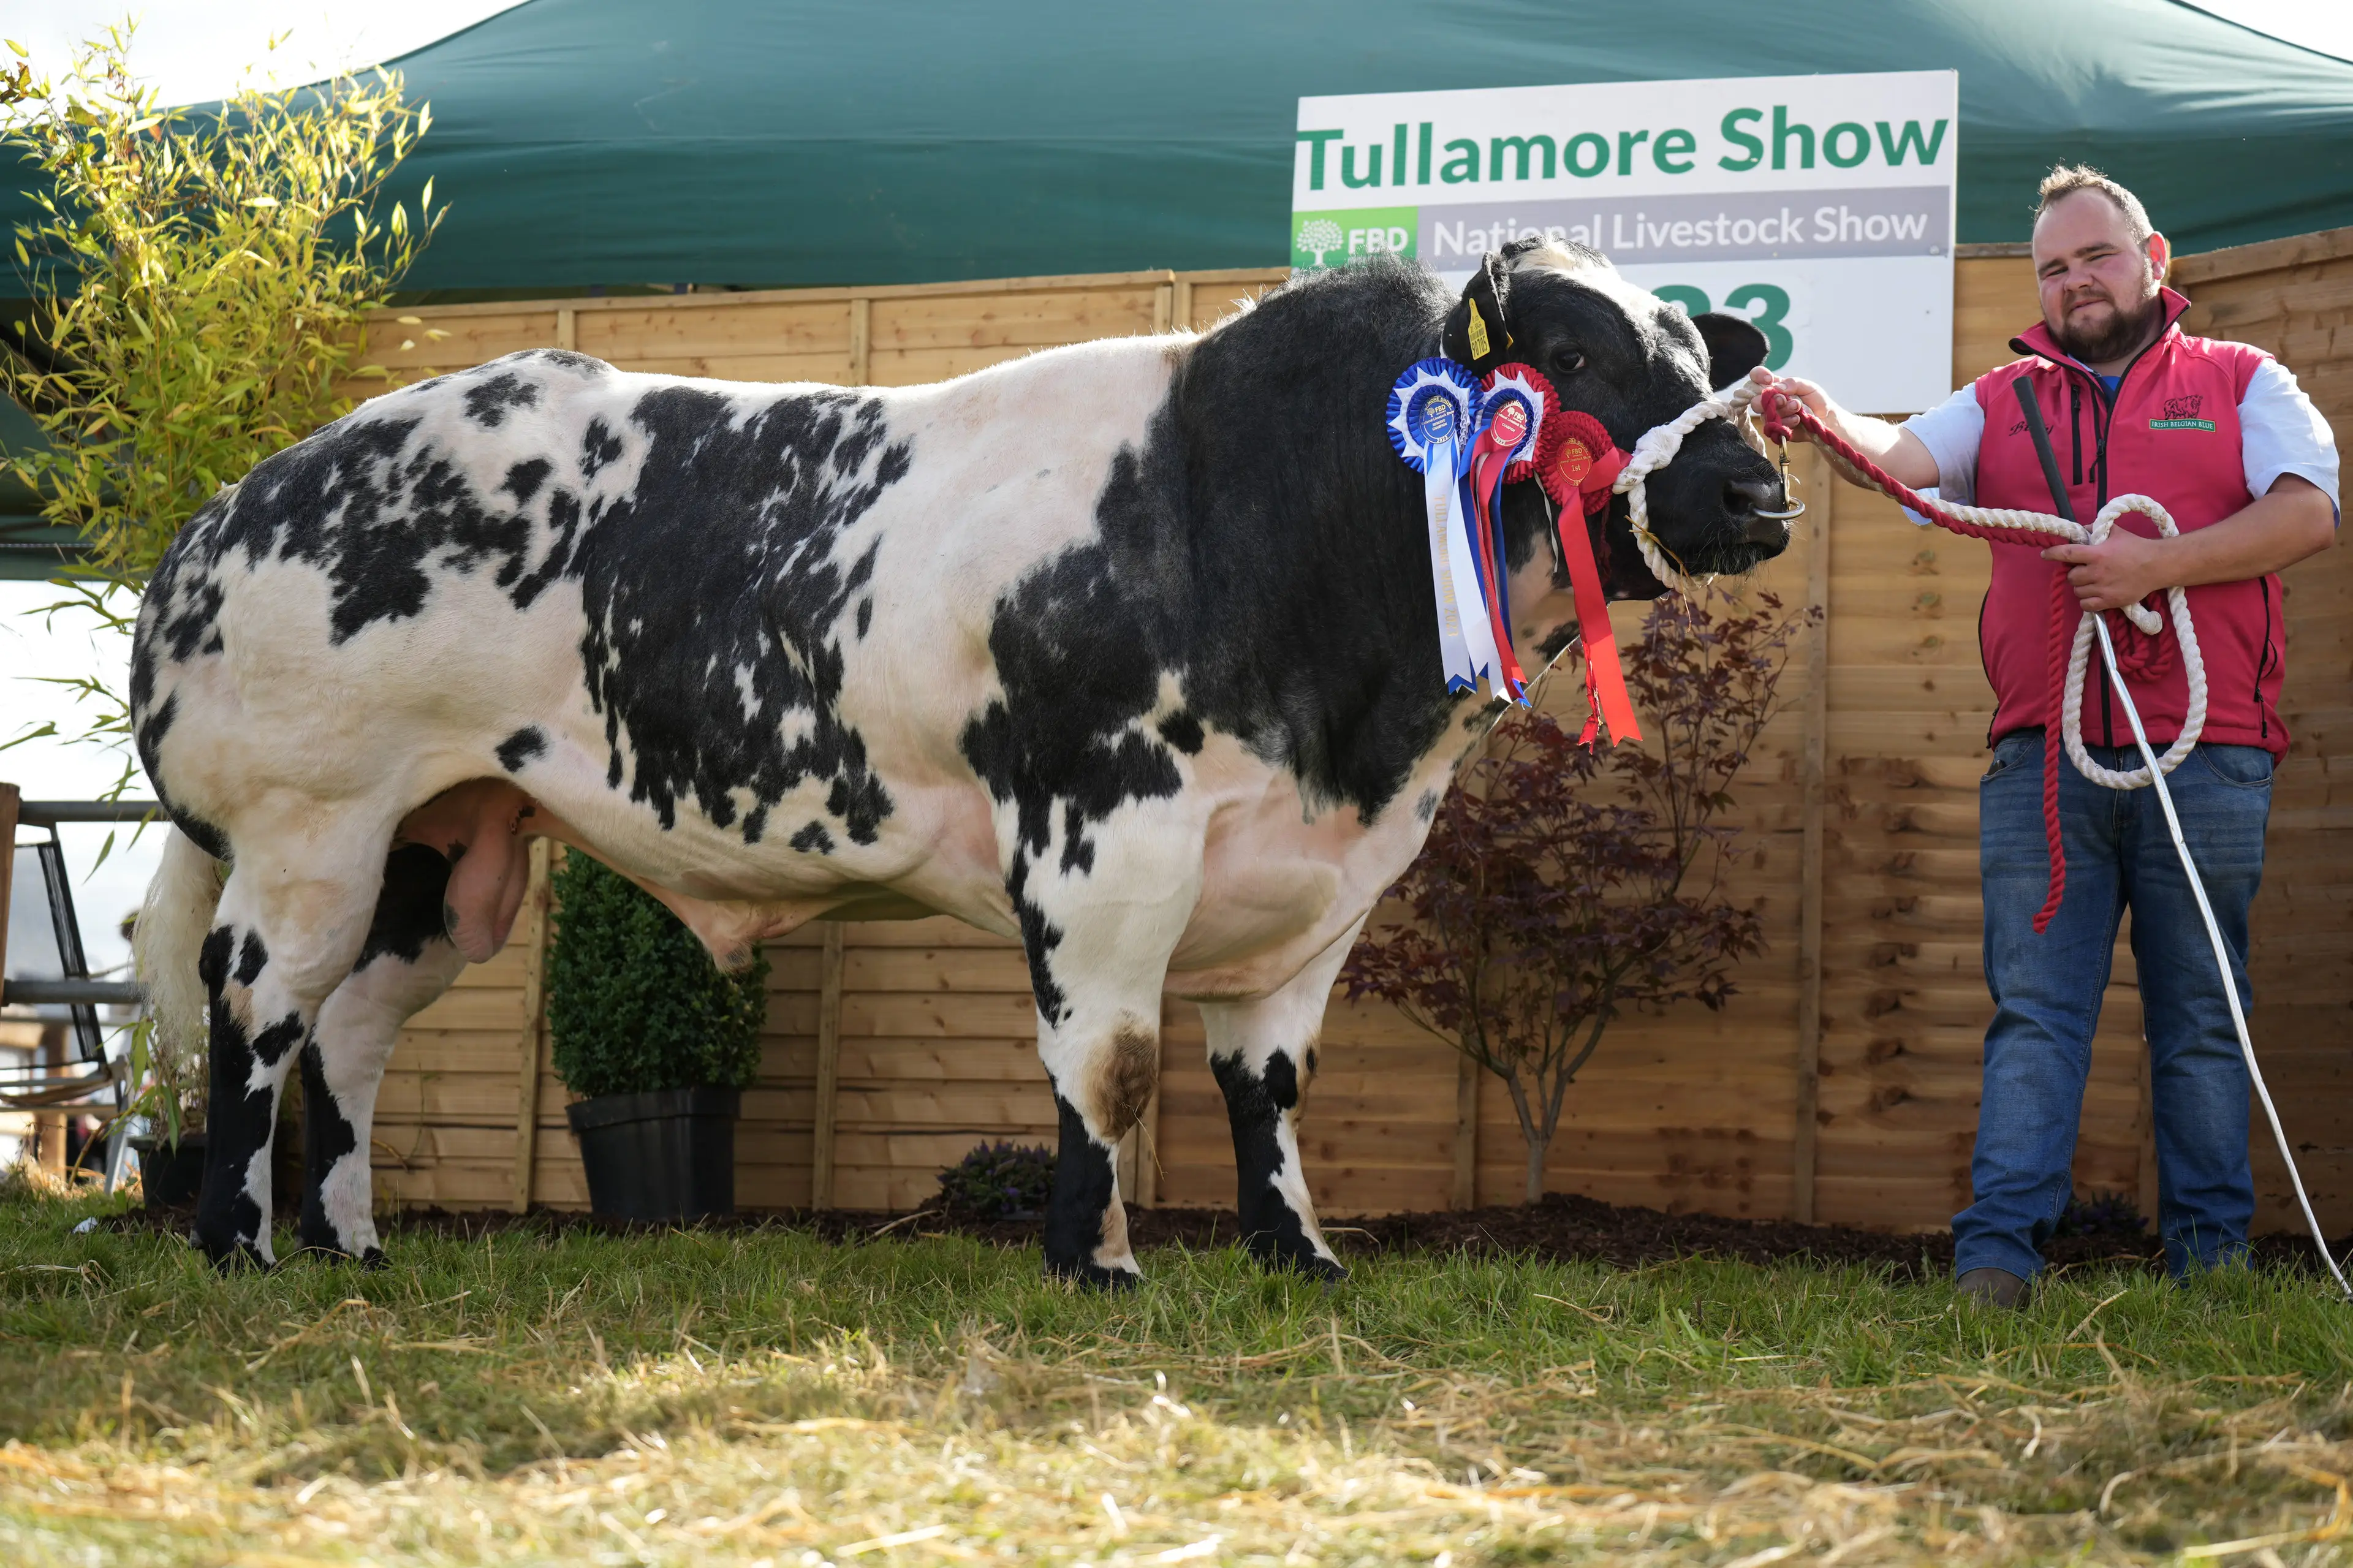 Billy Dunne's Reserve Overall Belgian Blue Champion sired by Empire d'Ochain (EZN)